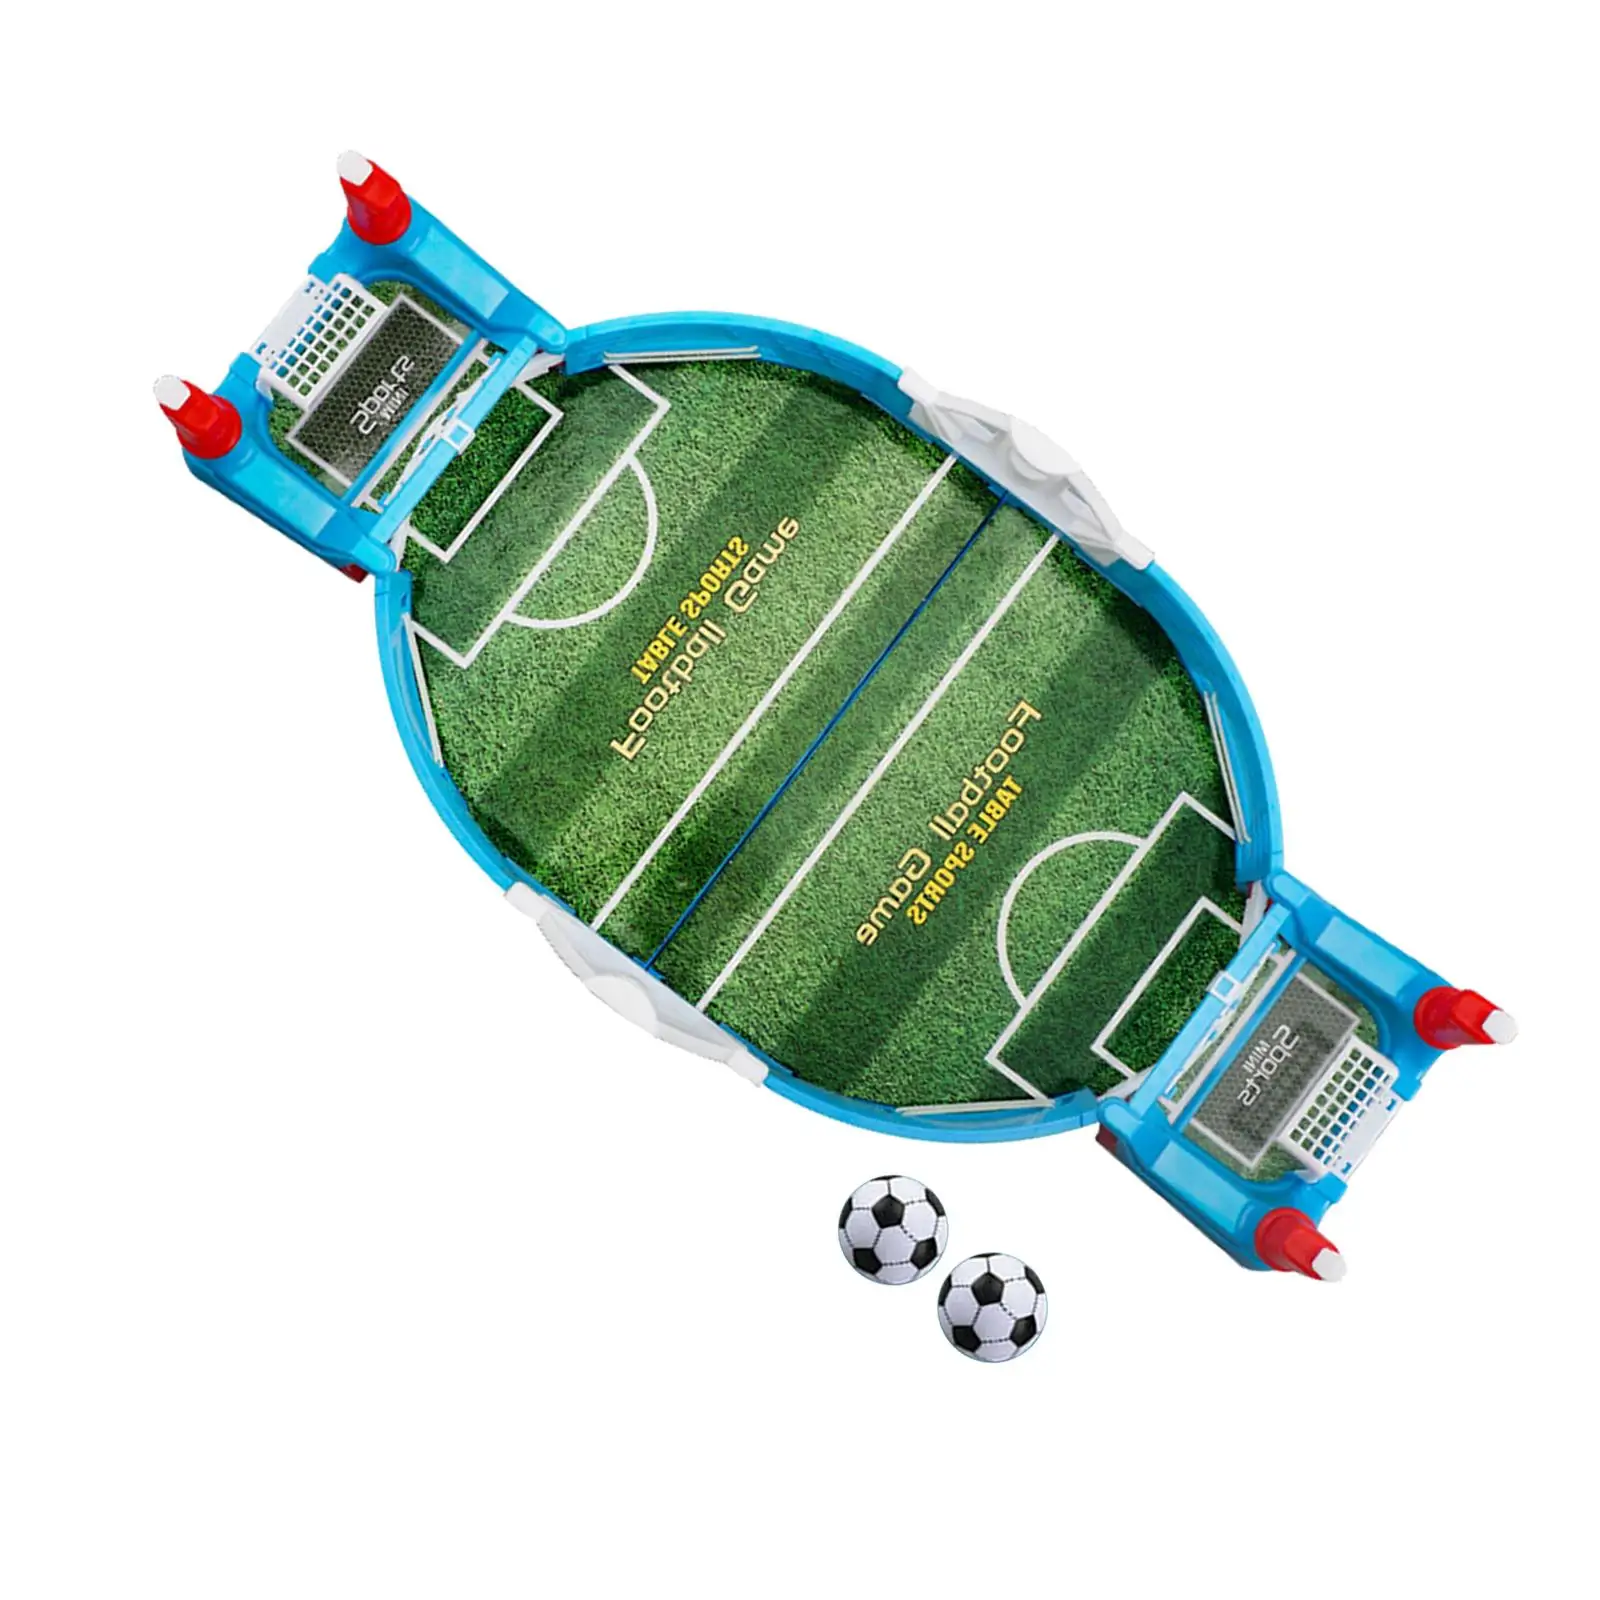 Table Board Football Game Interactive Toys Funny Football Game for Girls